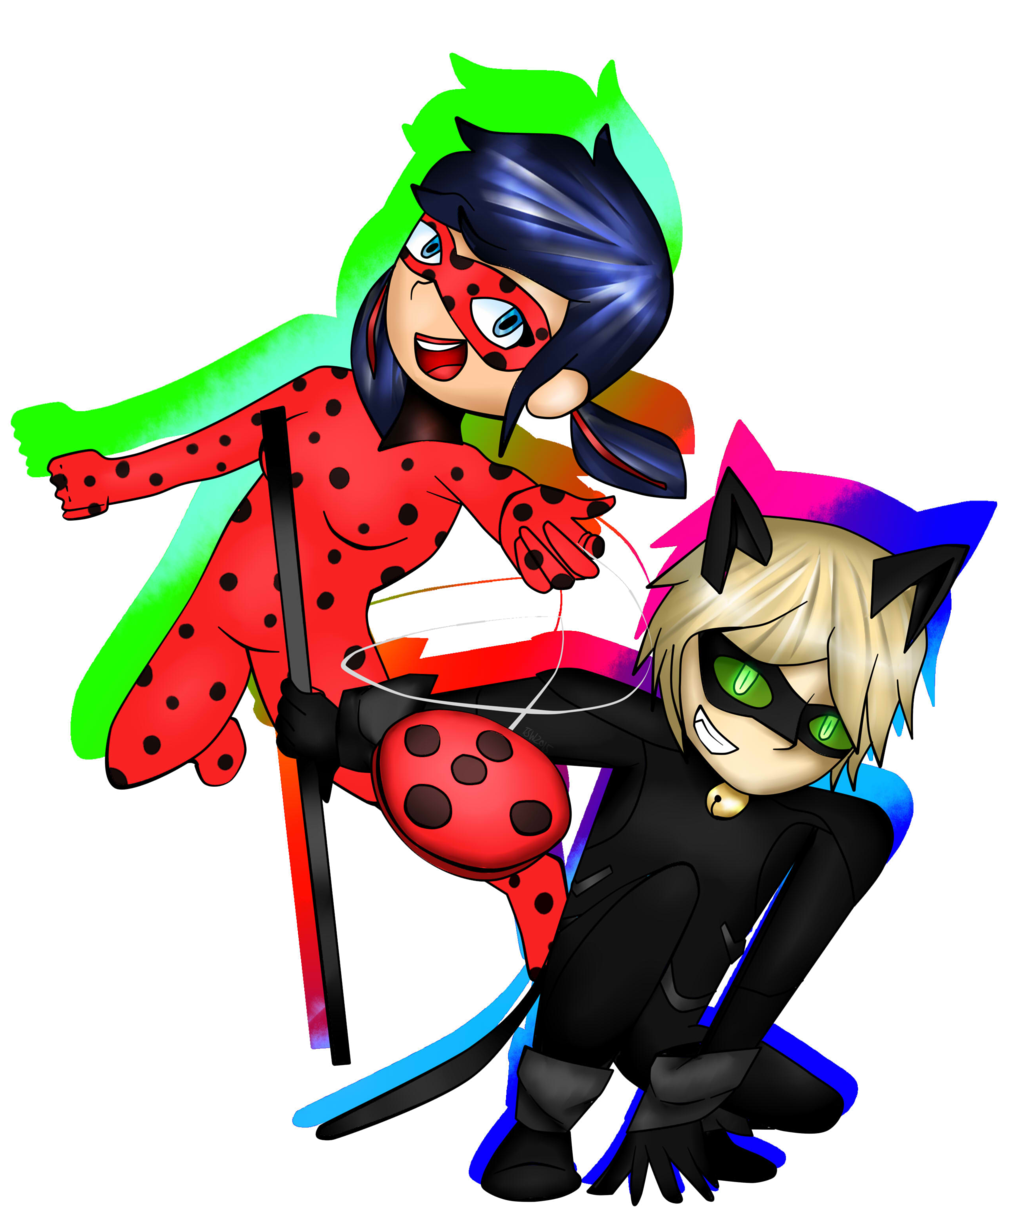 Miraculous Ladybug Cat and Bug by TheSketchWork on